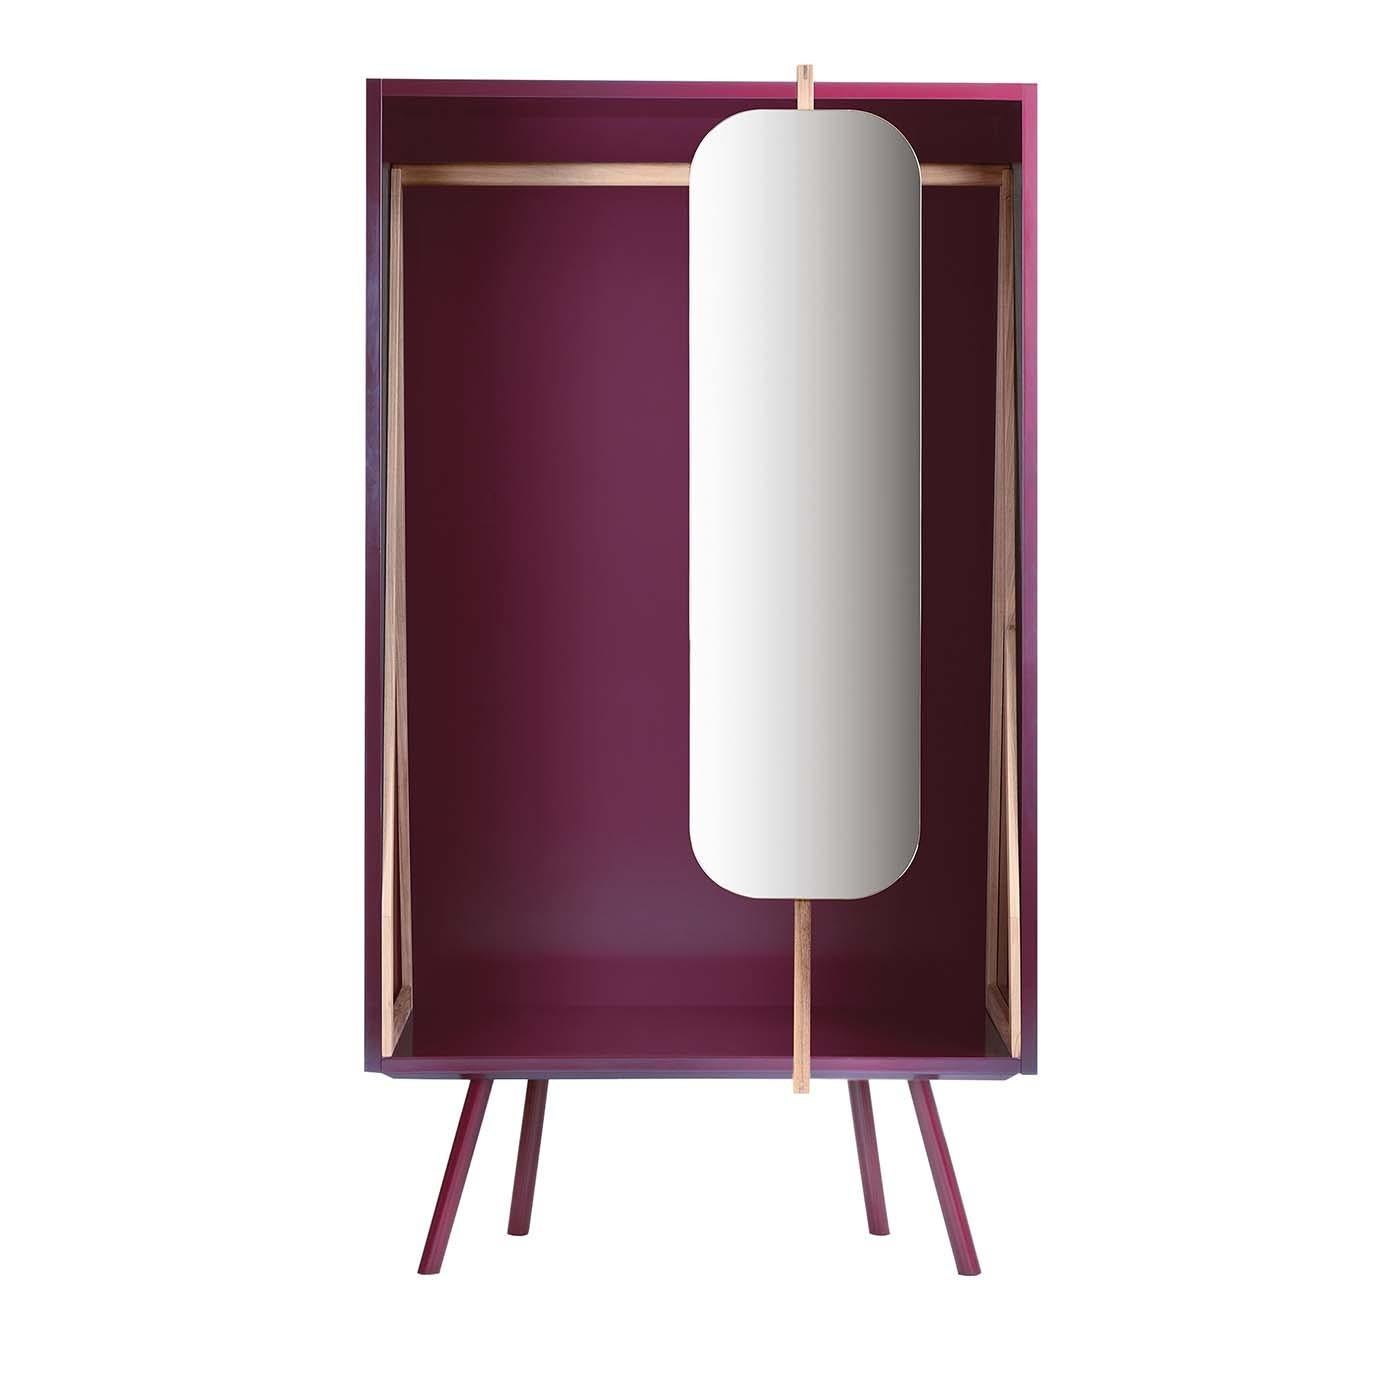 The Casson open cupboard in purple amaranth, designed by Daniele della Porta is a stylish and charming unit measuring 170 cm tall. Also available in red, indigo, bright mustard and dark purple, the elegant cupboard features a deluxe mirror attached